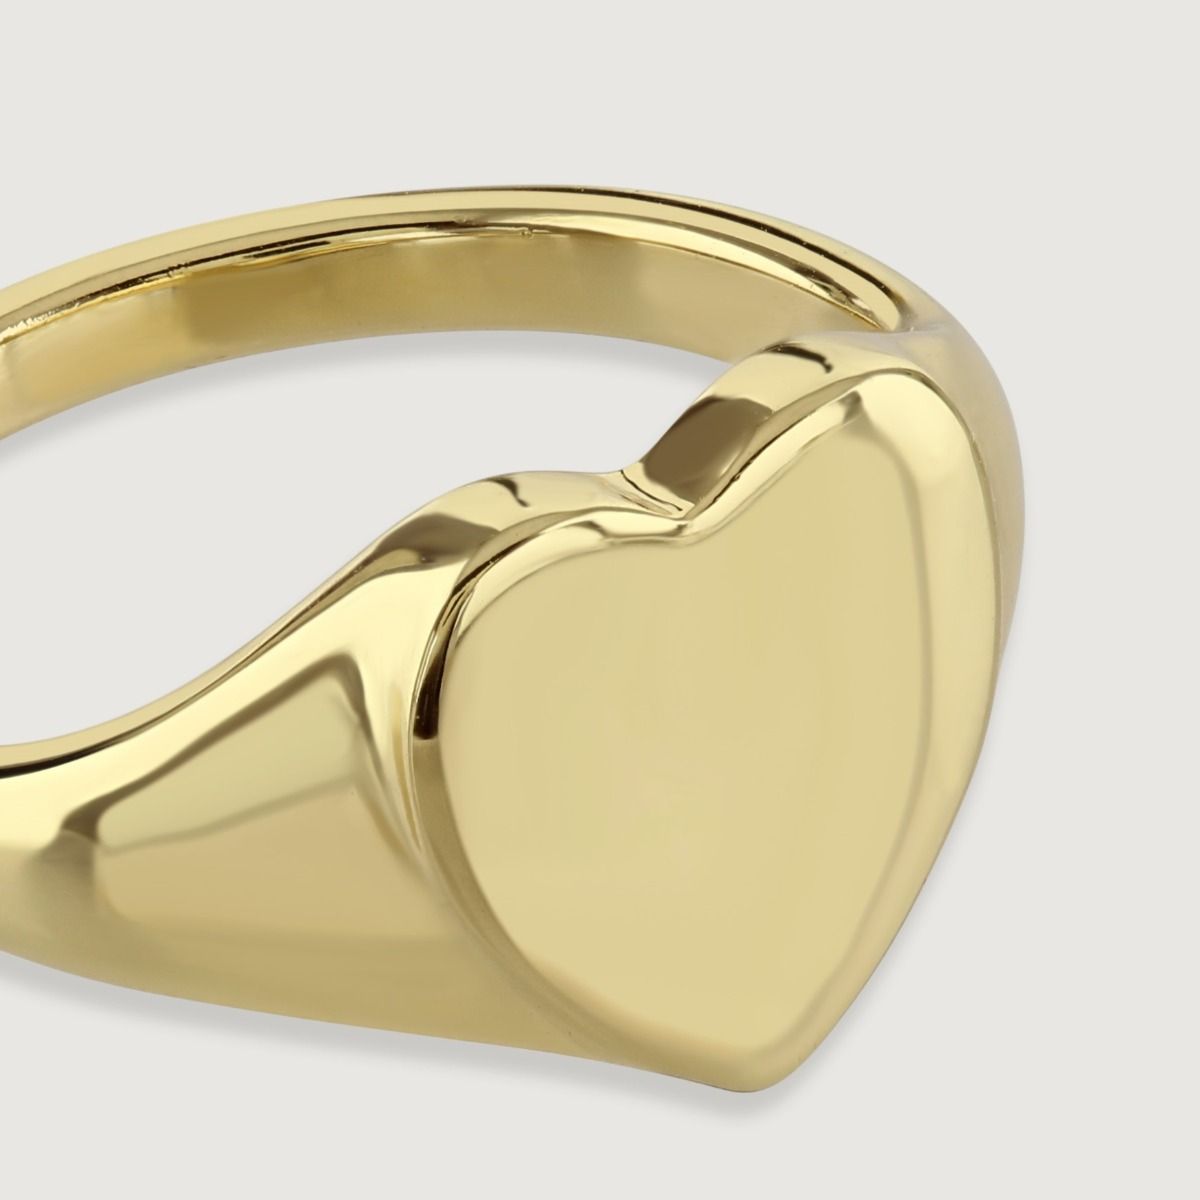 The Heart Design Gold Signet Ring is a stunning piece of jewellery that combines timeless elegance with a touch of romance. Crafted with meticulous attention to detail, this ring features a heart-shaped design on the signet, creating a symbol of love and 